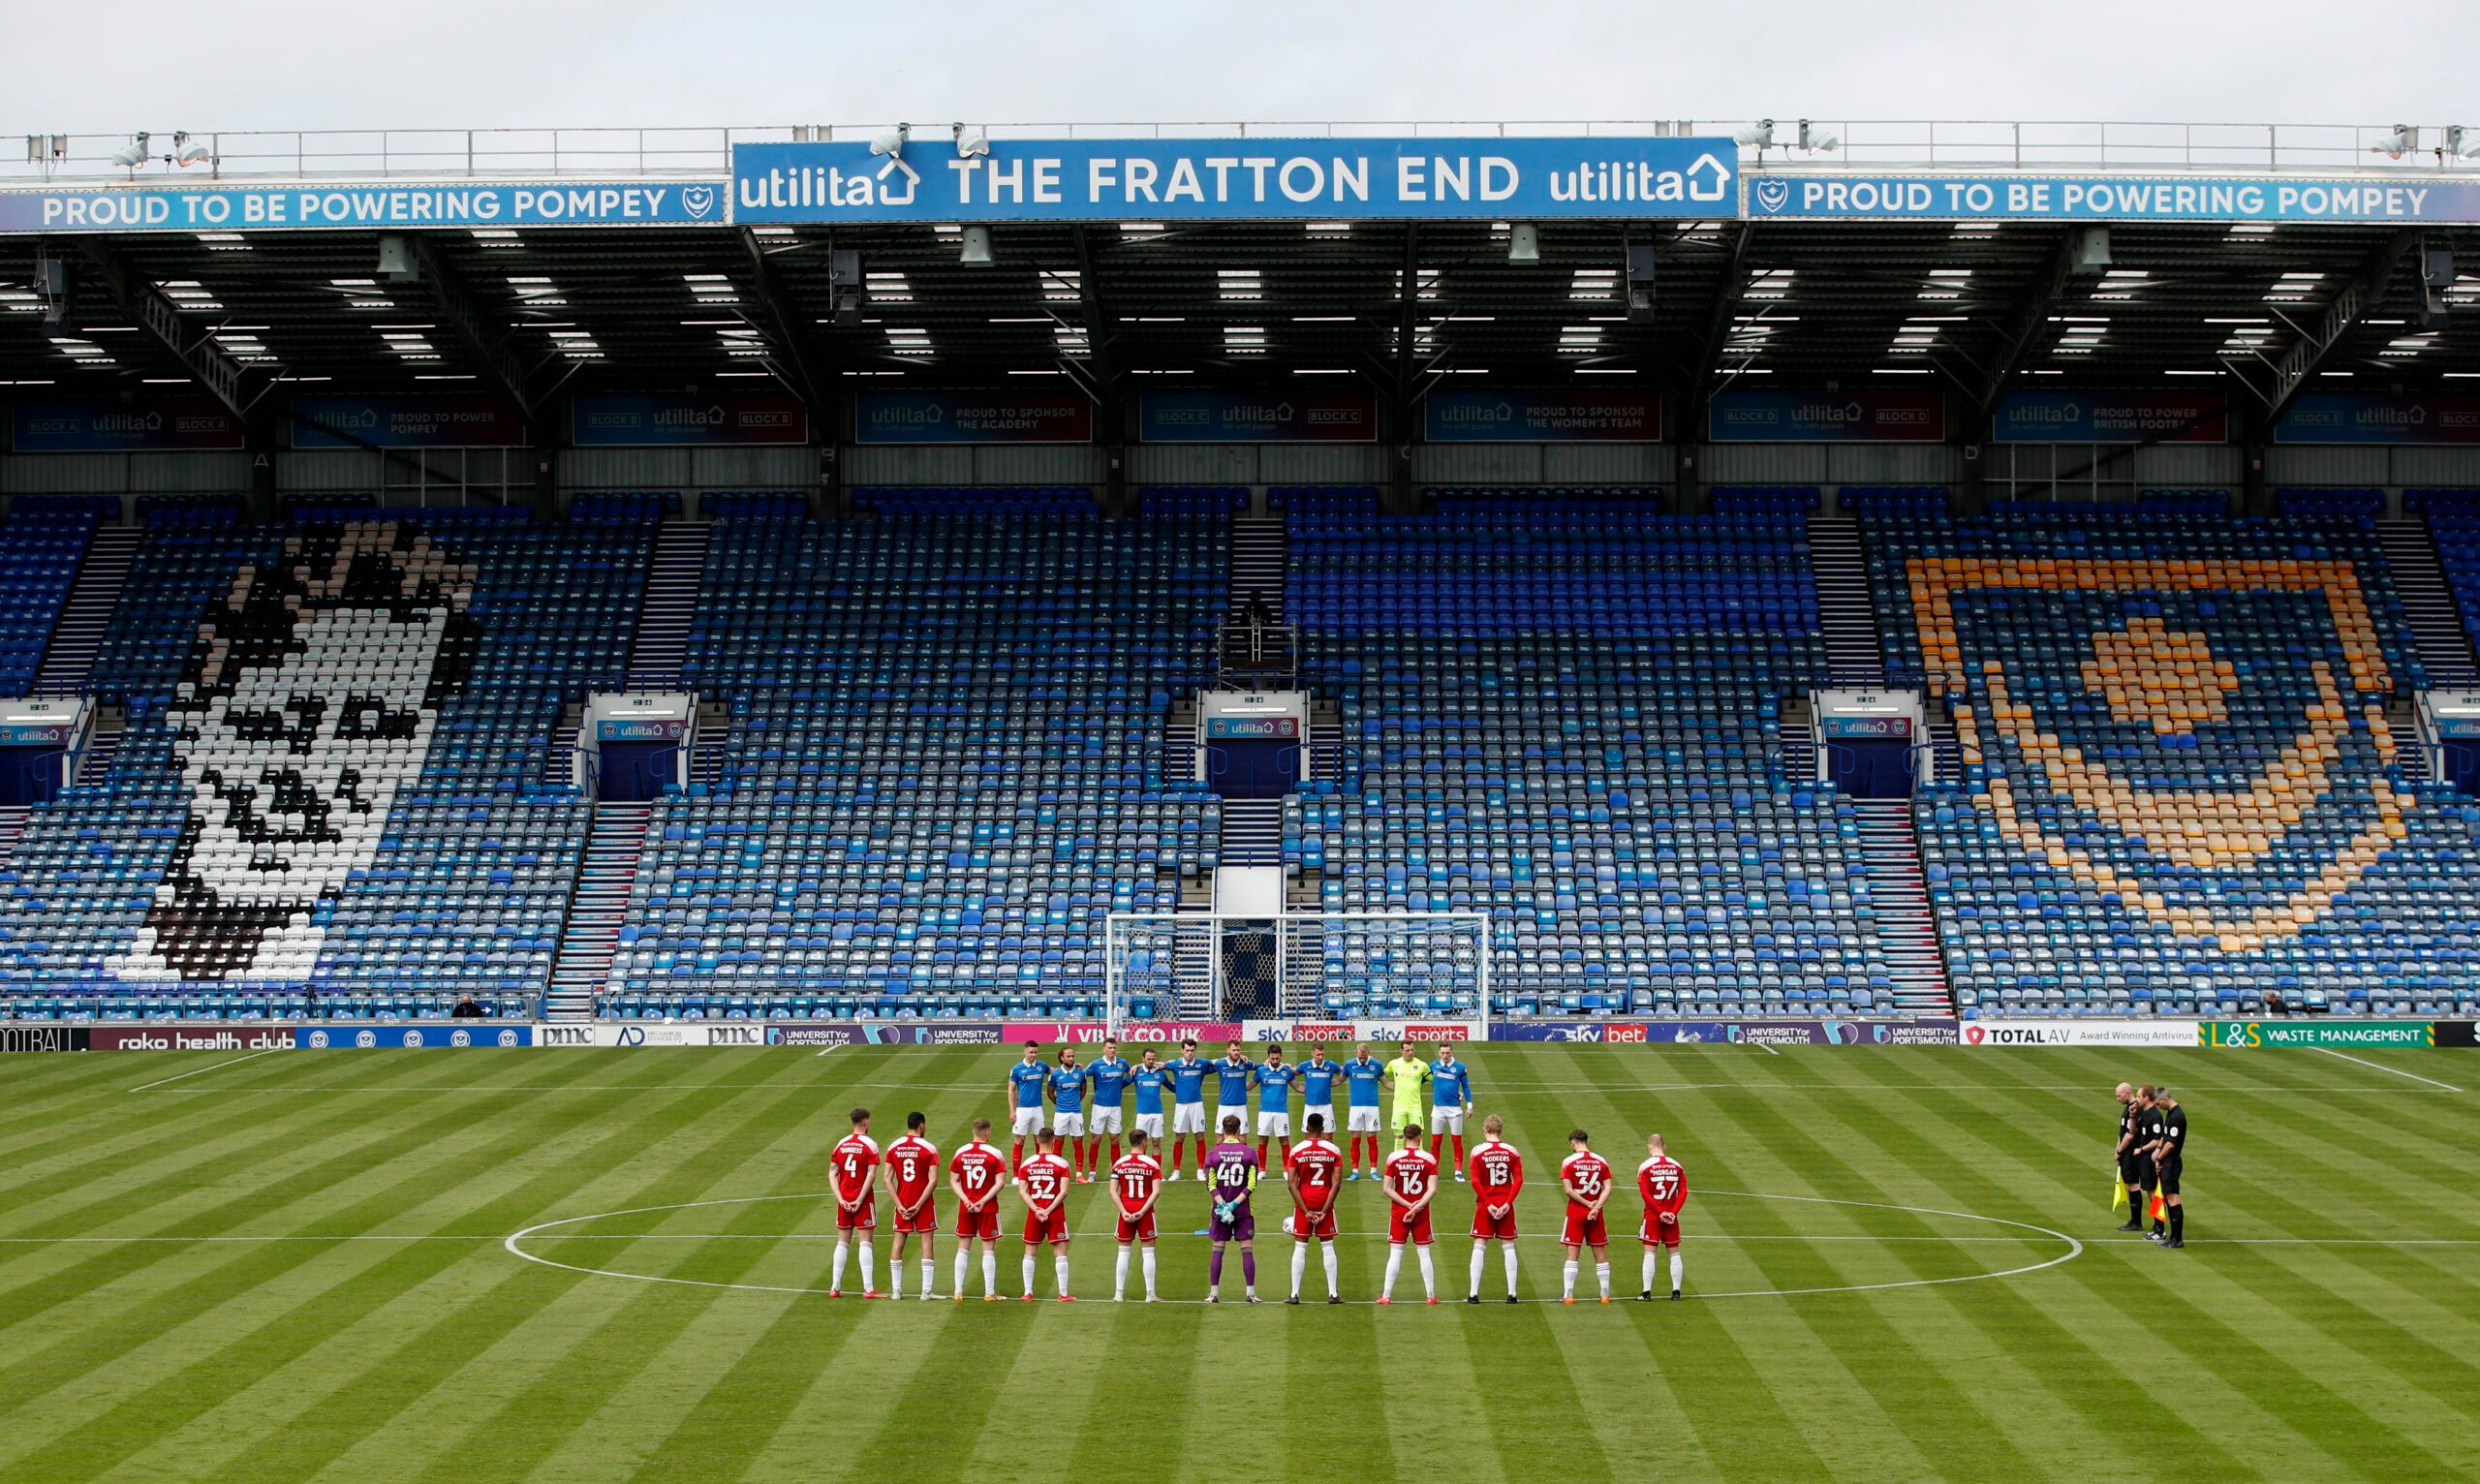 Soccer Football - League One - Portsmouth v Accrington Stanley - Fratton Park, Portsmouth, Britain - May 9, 2021 General view during a minute's silence in memory of former player Alan McLoughlin before kick off Action Images/Andrew Boyers EDITORIAL USE ONLY. No use with unauthorized audio, video, data, fixture lists, club/league logos or 'live' services. Online in-match use limited to 75 images, no video emulation. No use in betting, games or single club /league/player publications.  Please cont